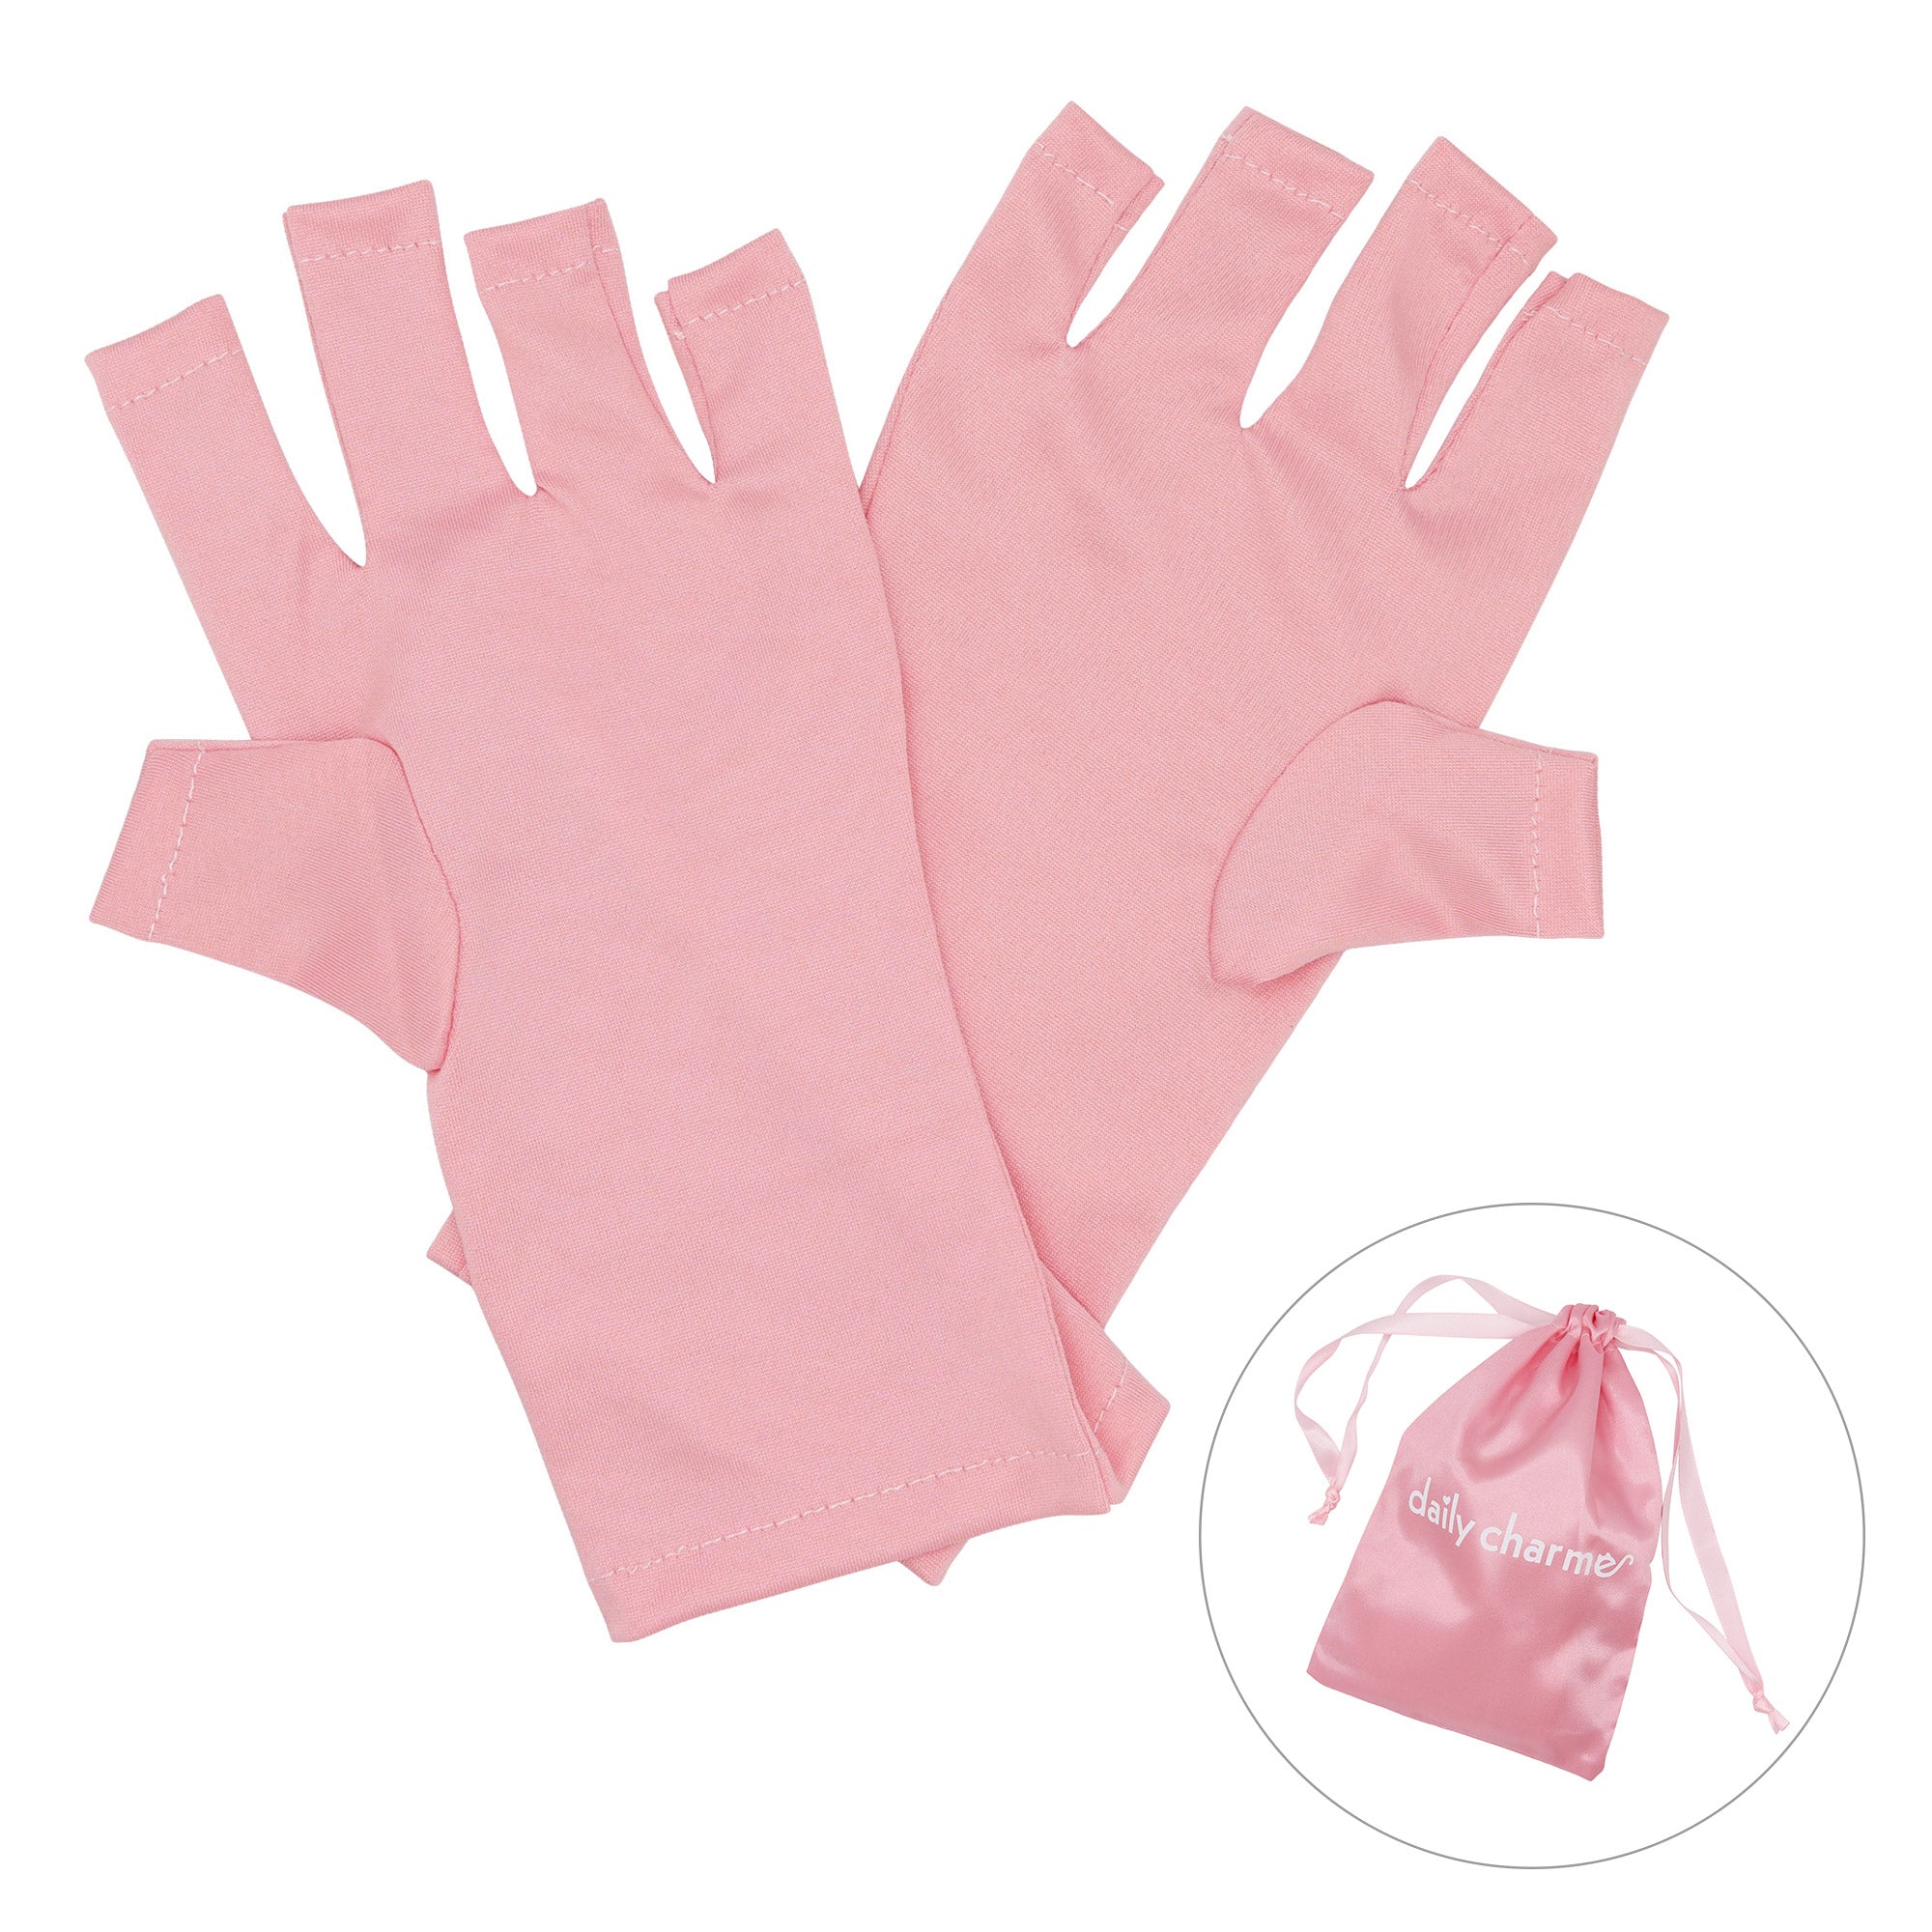 Gel Manicure UV Gloves / Pink – Daily Charme